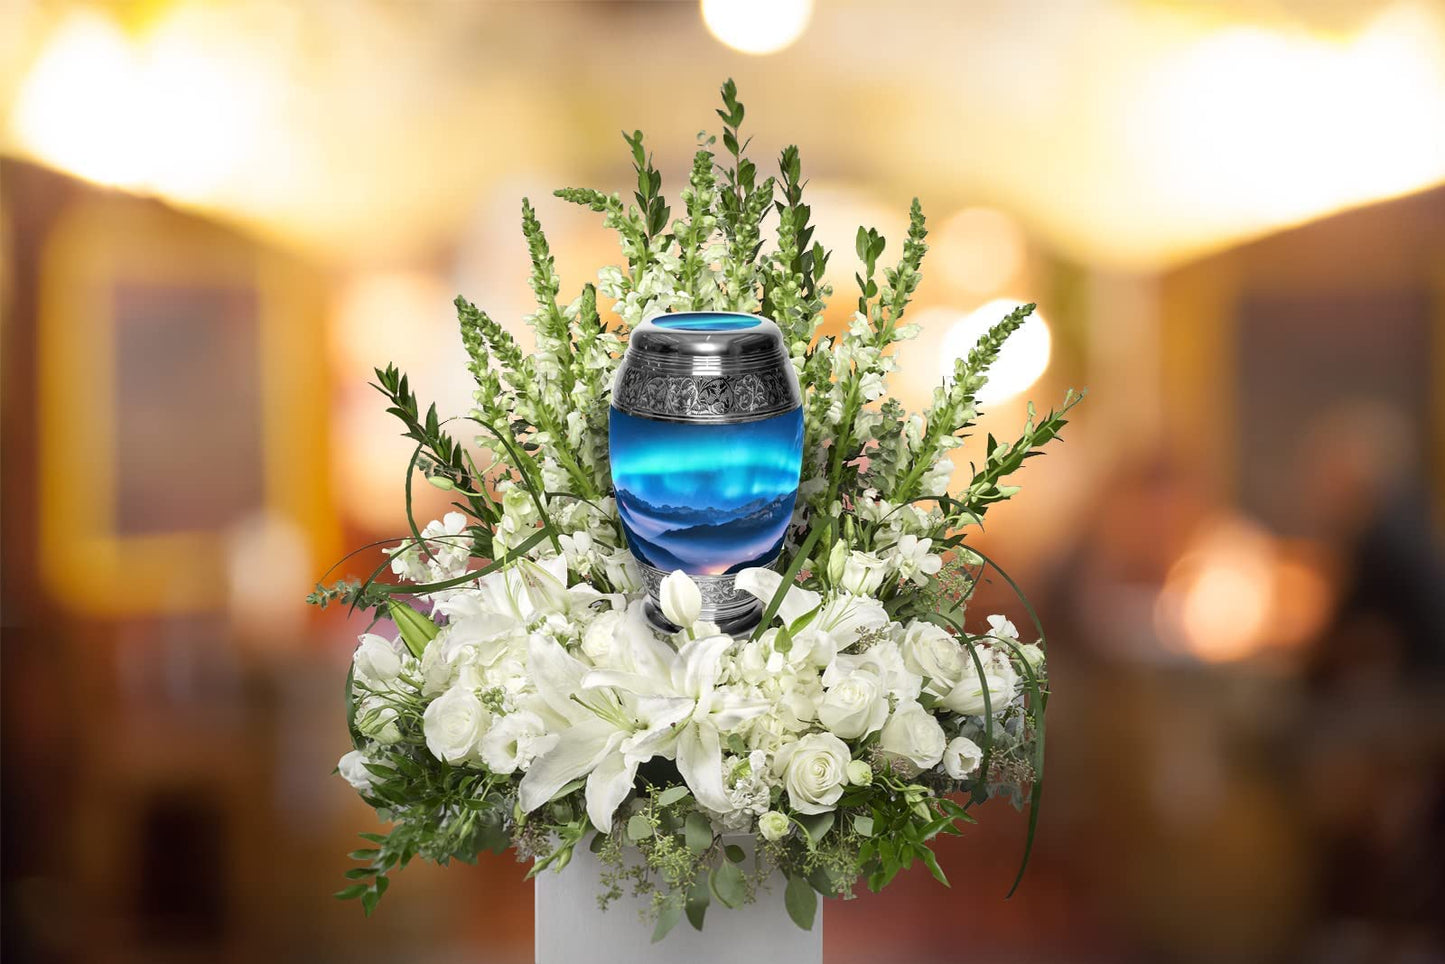 Aurora Borealis Cremation Urns for Human Ashes Adult Female for Funeral, Burial or Home. Cremation Urns for Adult Male Large Urns for Dad and Cremation Urns for Men XL Large & Small Urns for Ashes